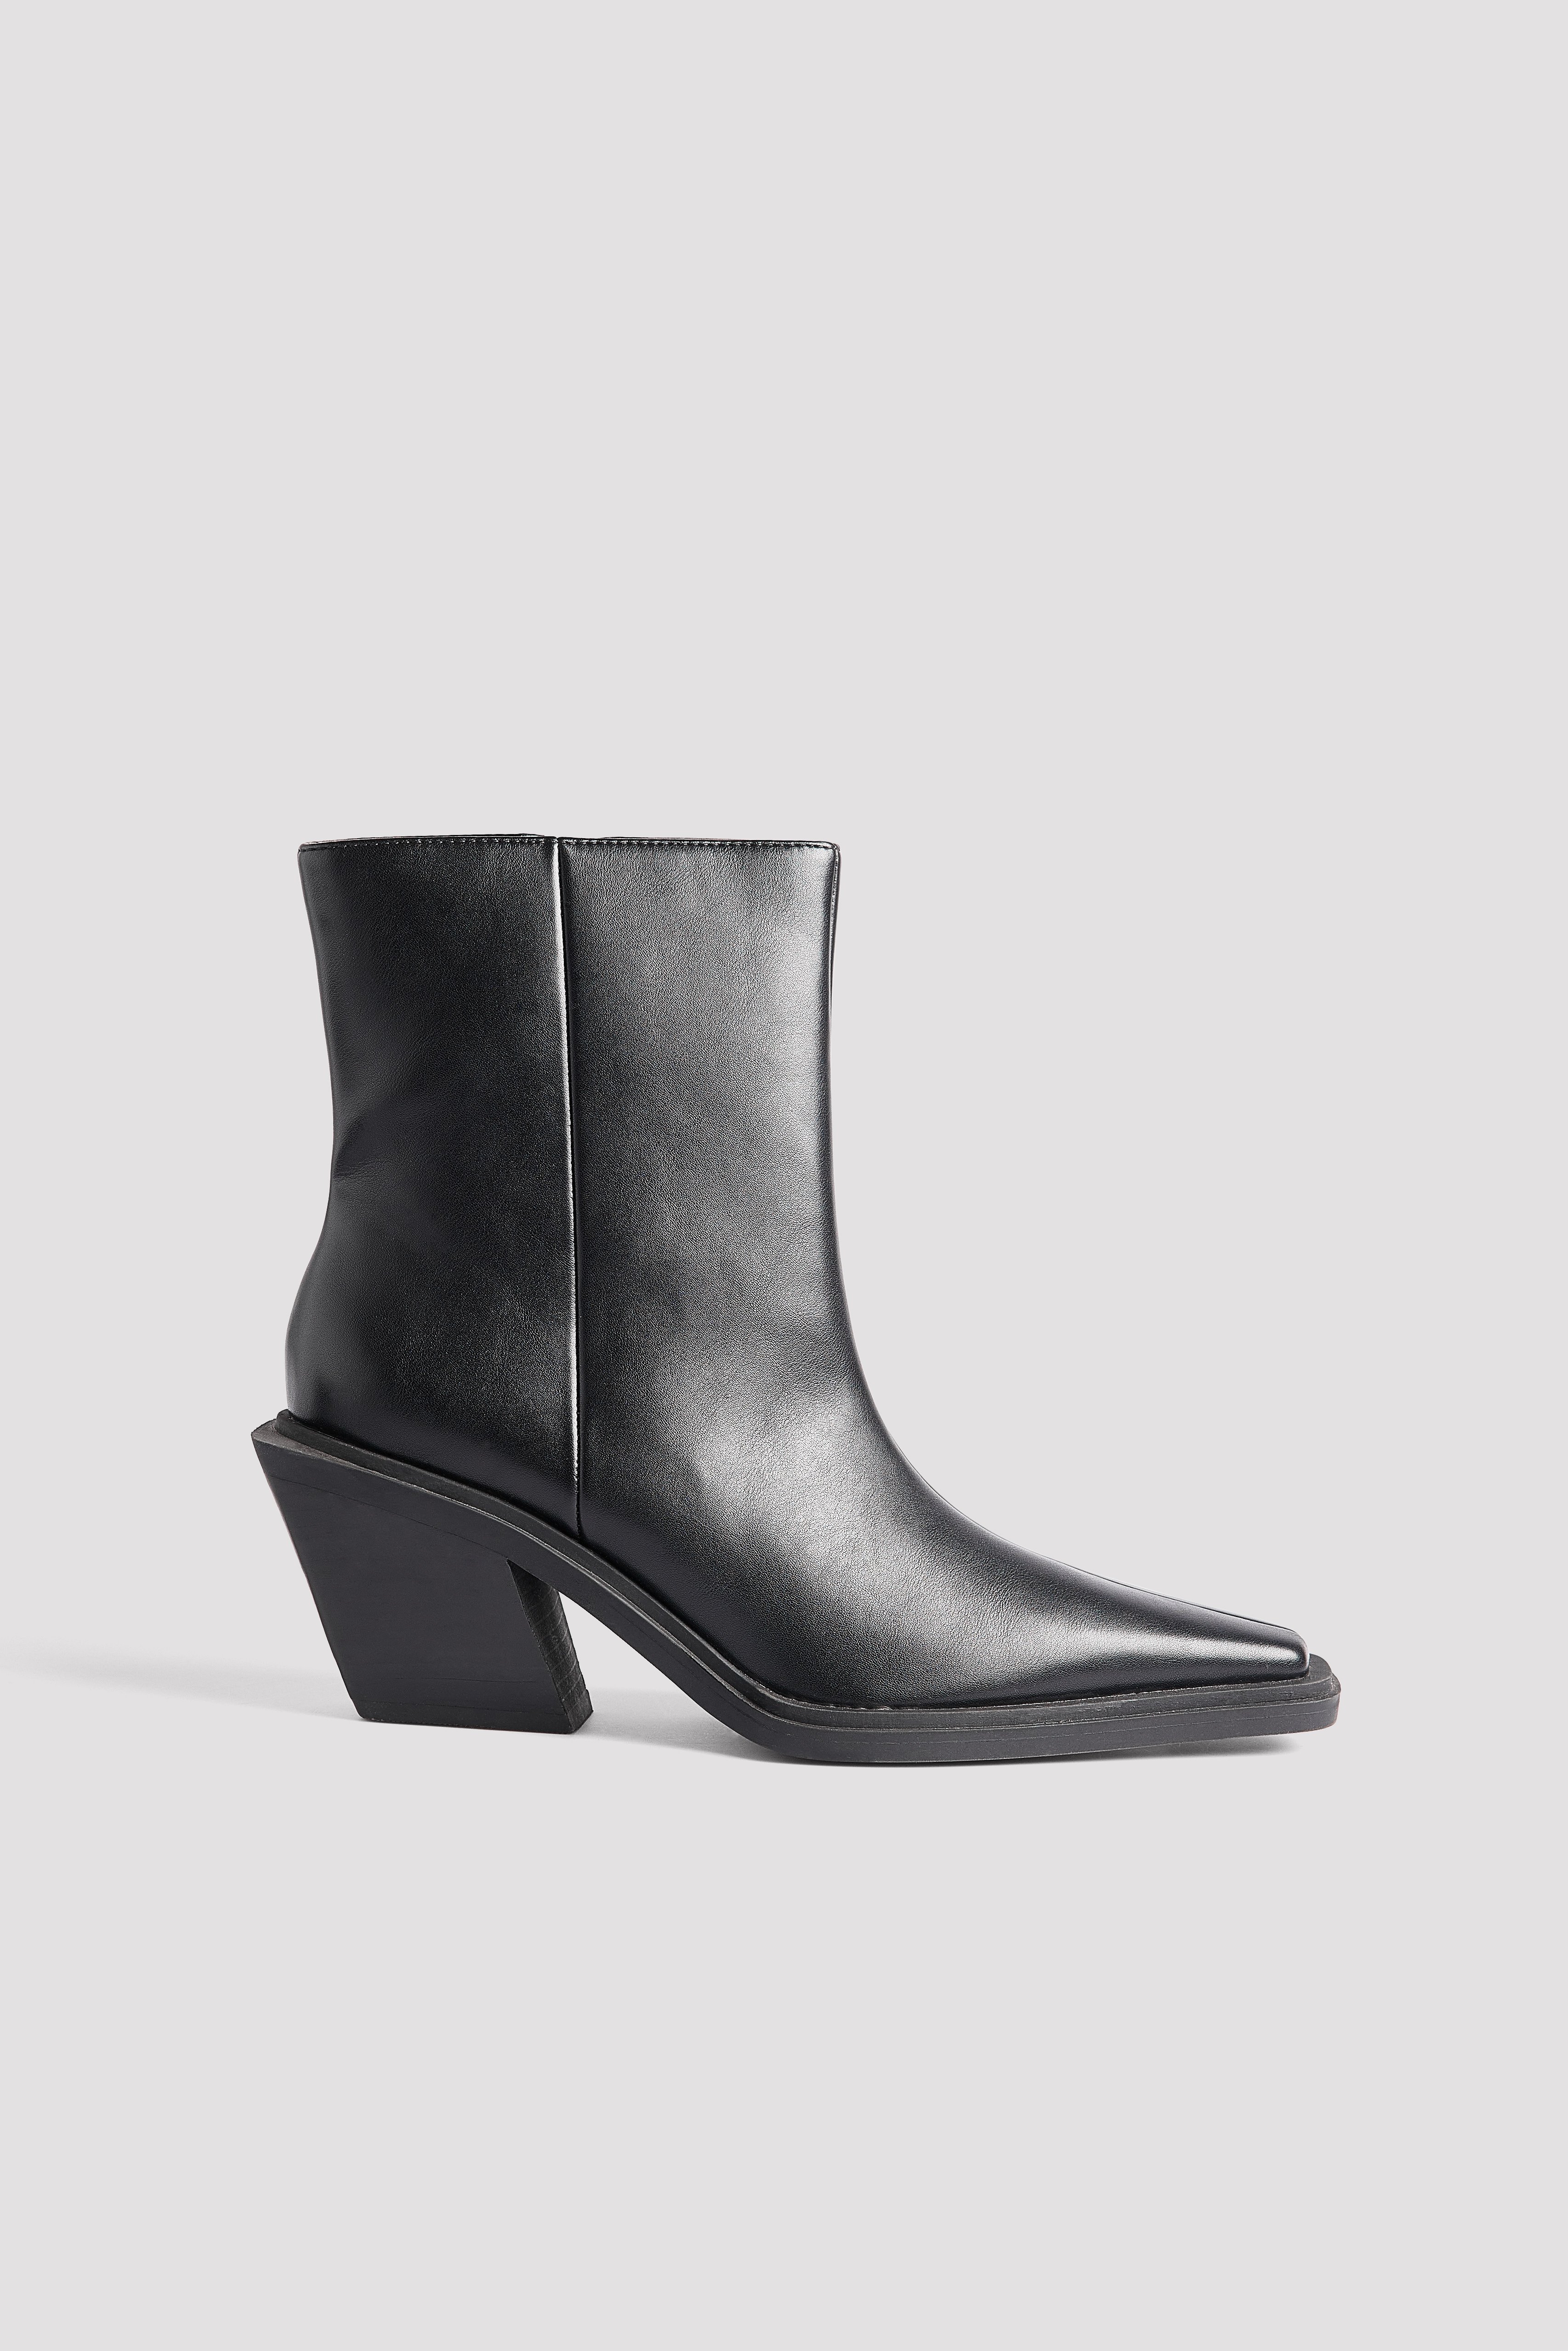 Ankle Boots | Women's Chelsea, Sock & Satin Boots | NA-KD